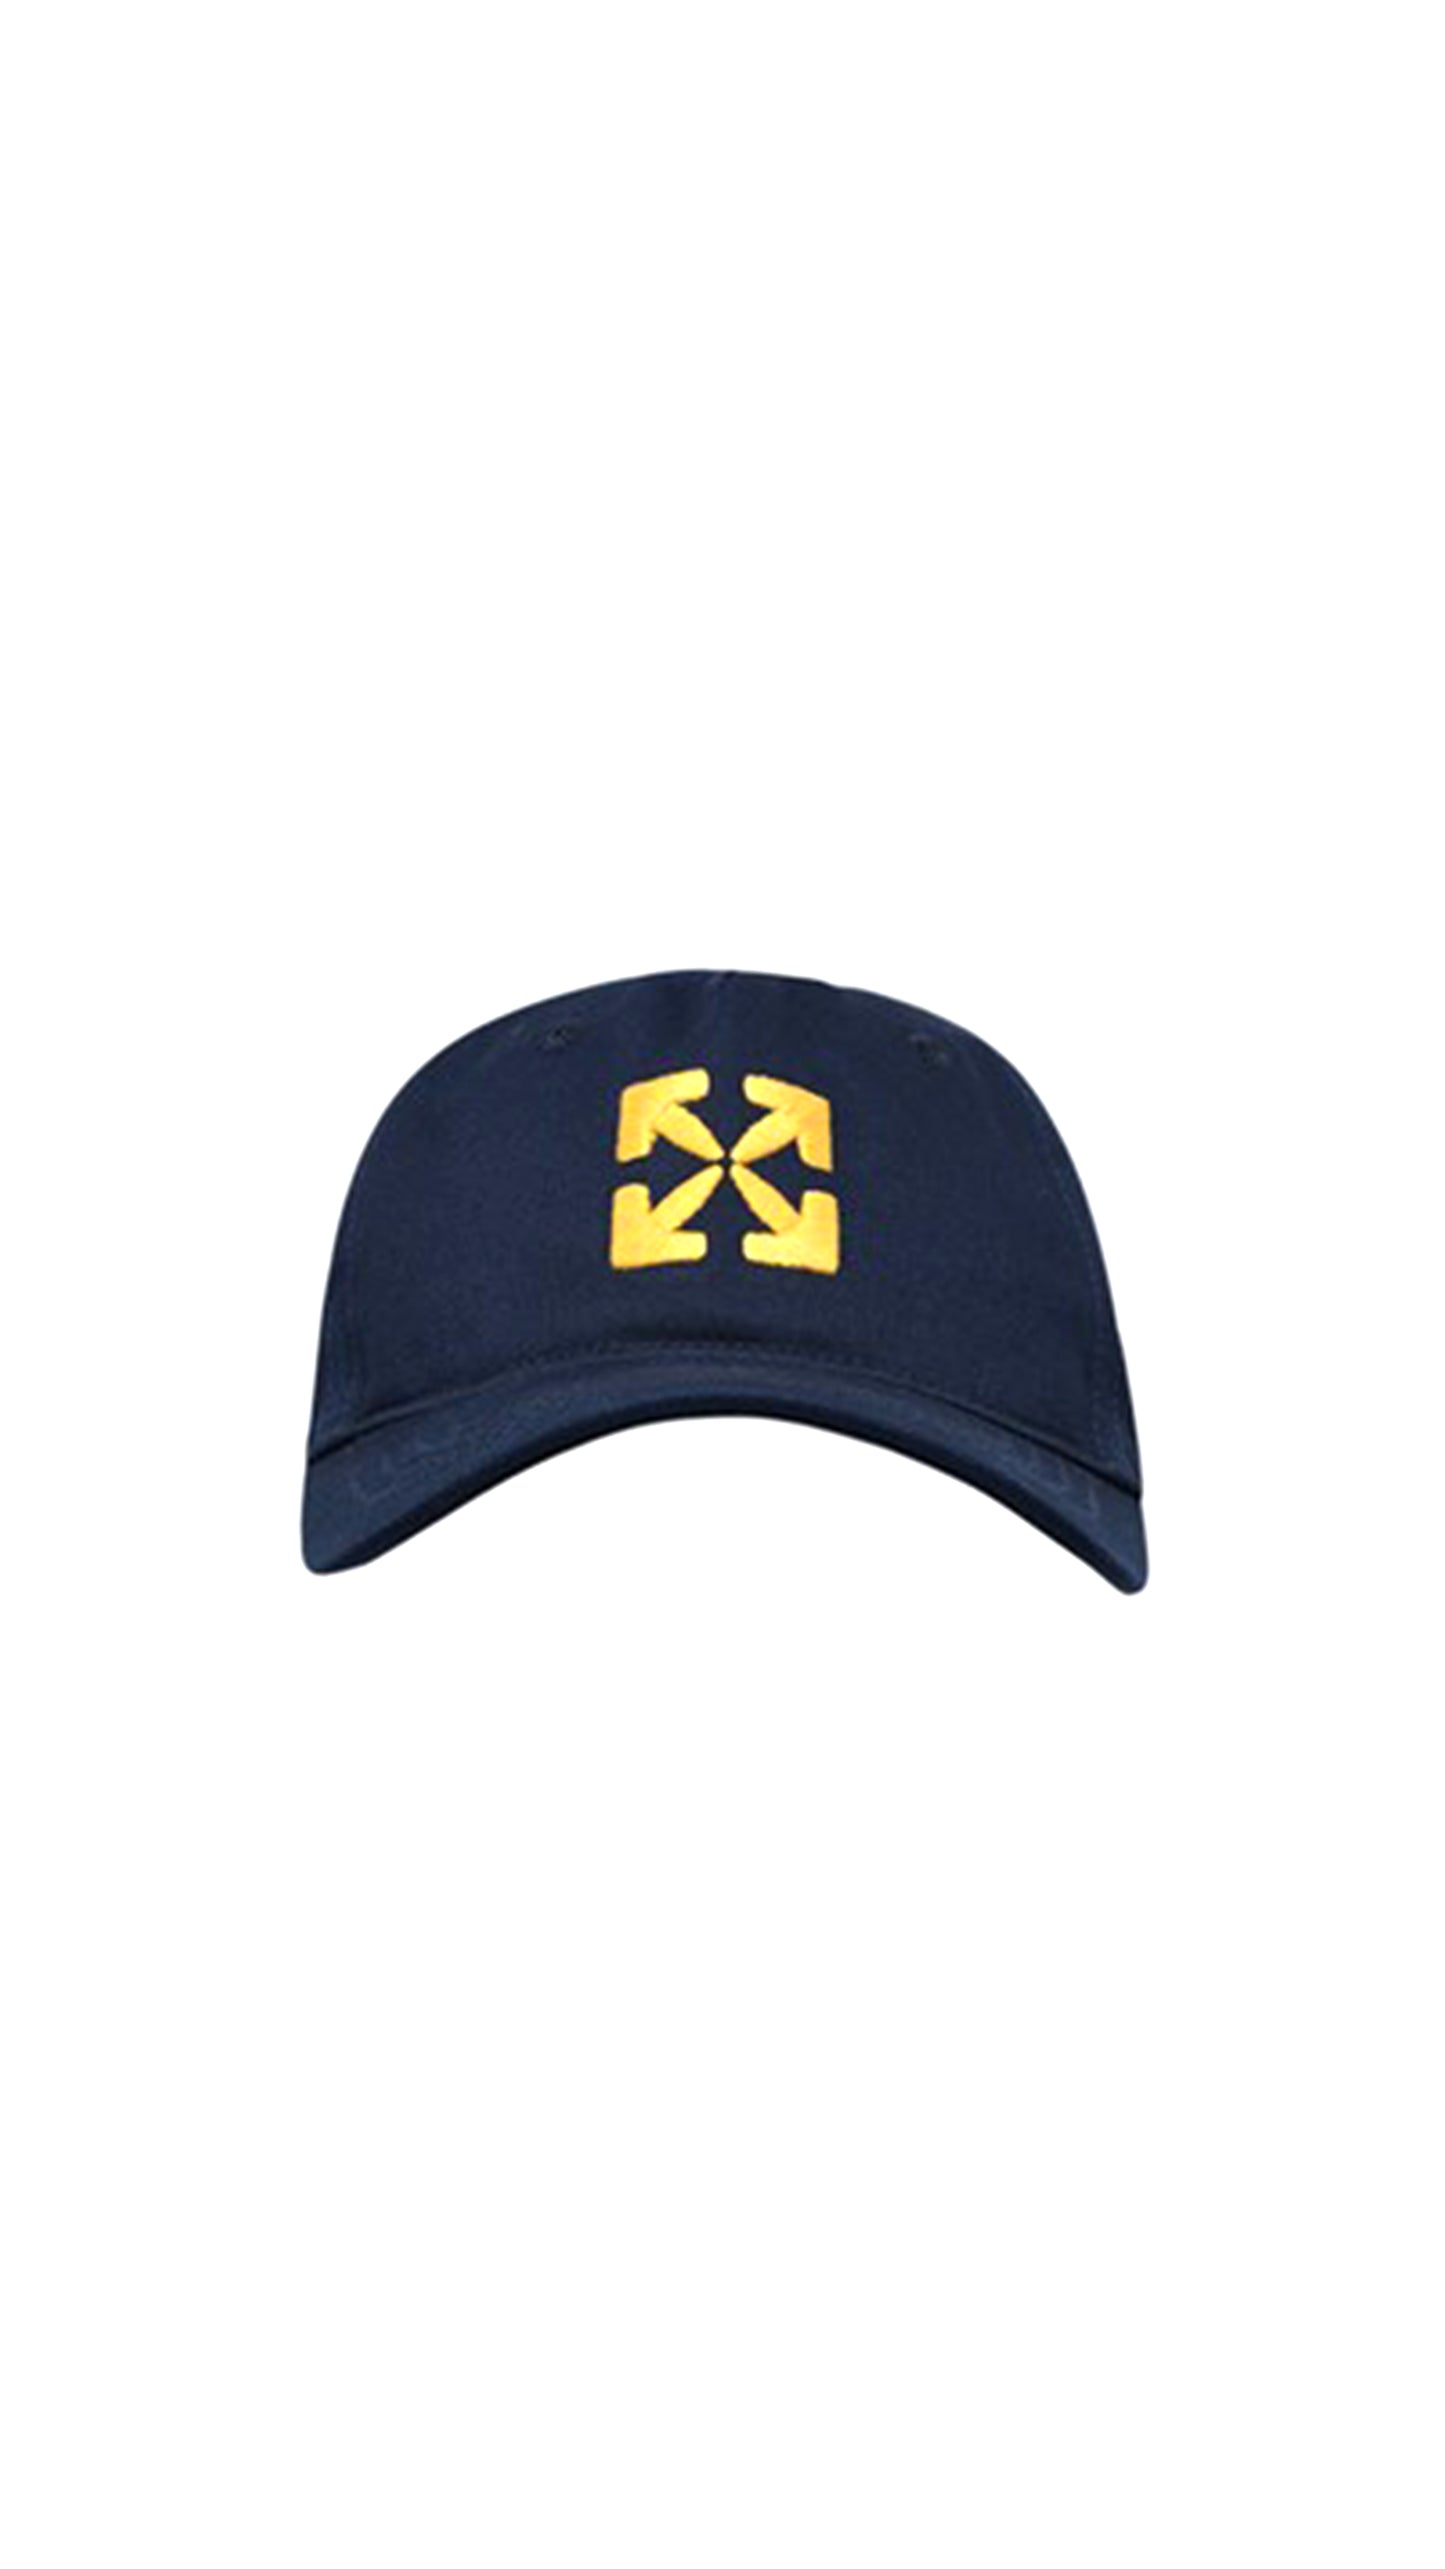 Embroidered Cap - Navy